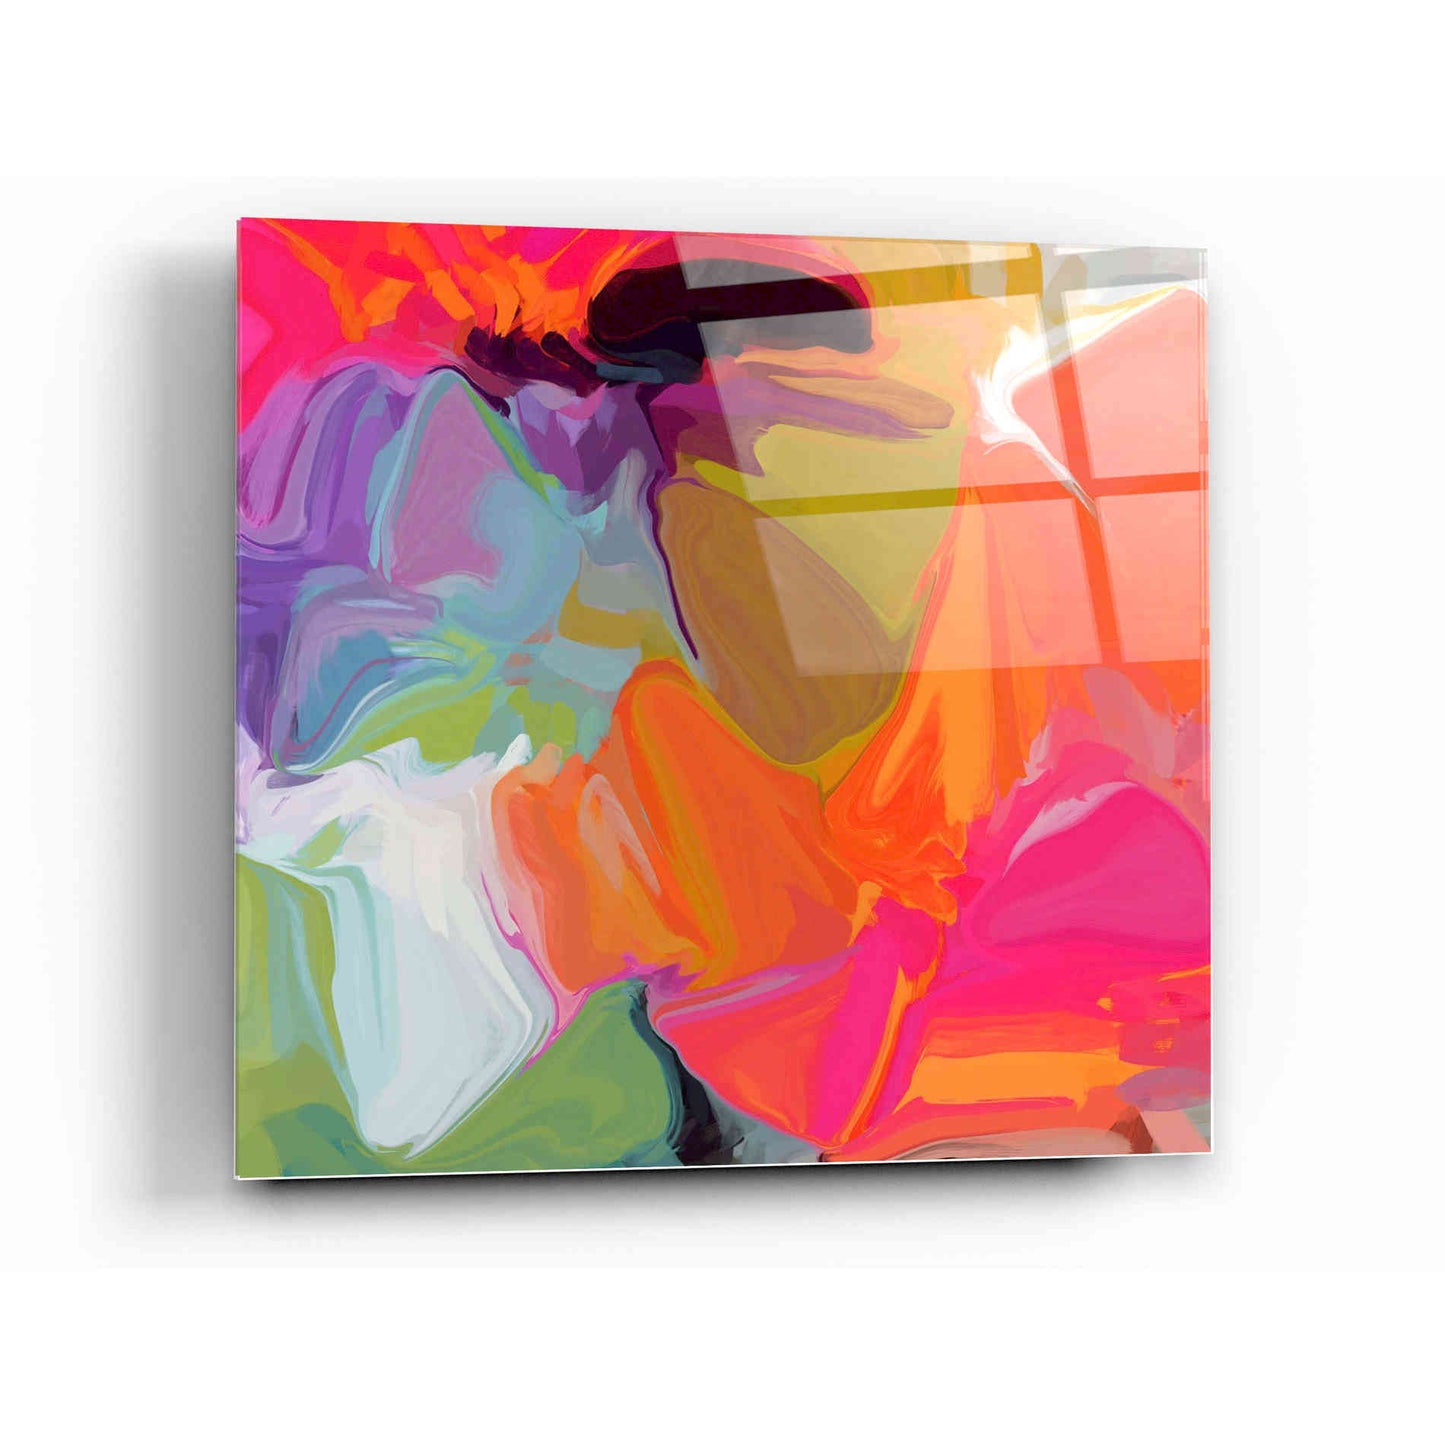 Epic Art 'Color Vibrations 2' by Irena Orlov, Acrylic Glass Wall Art,12x12